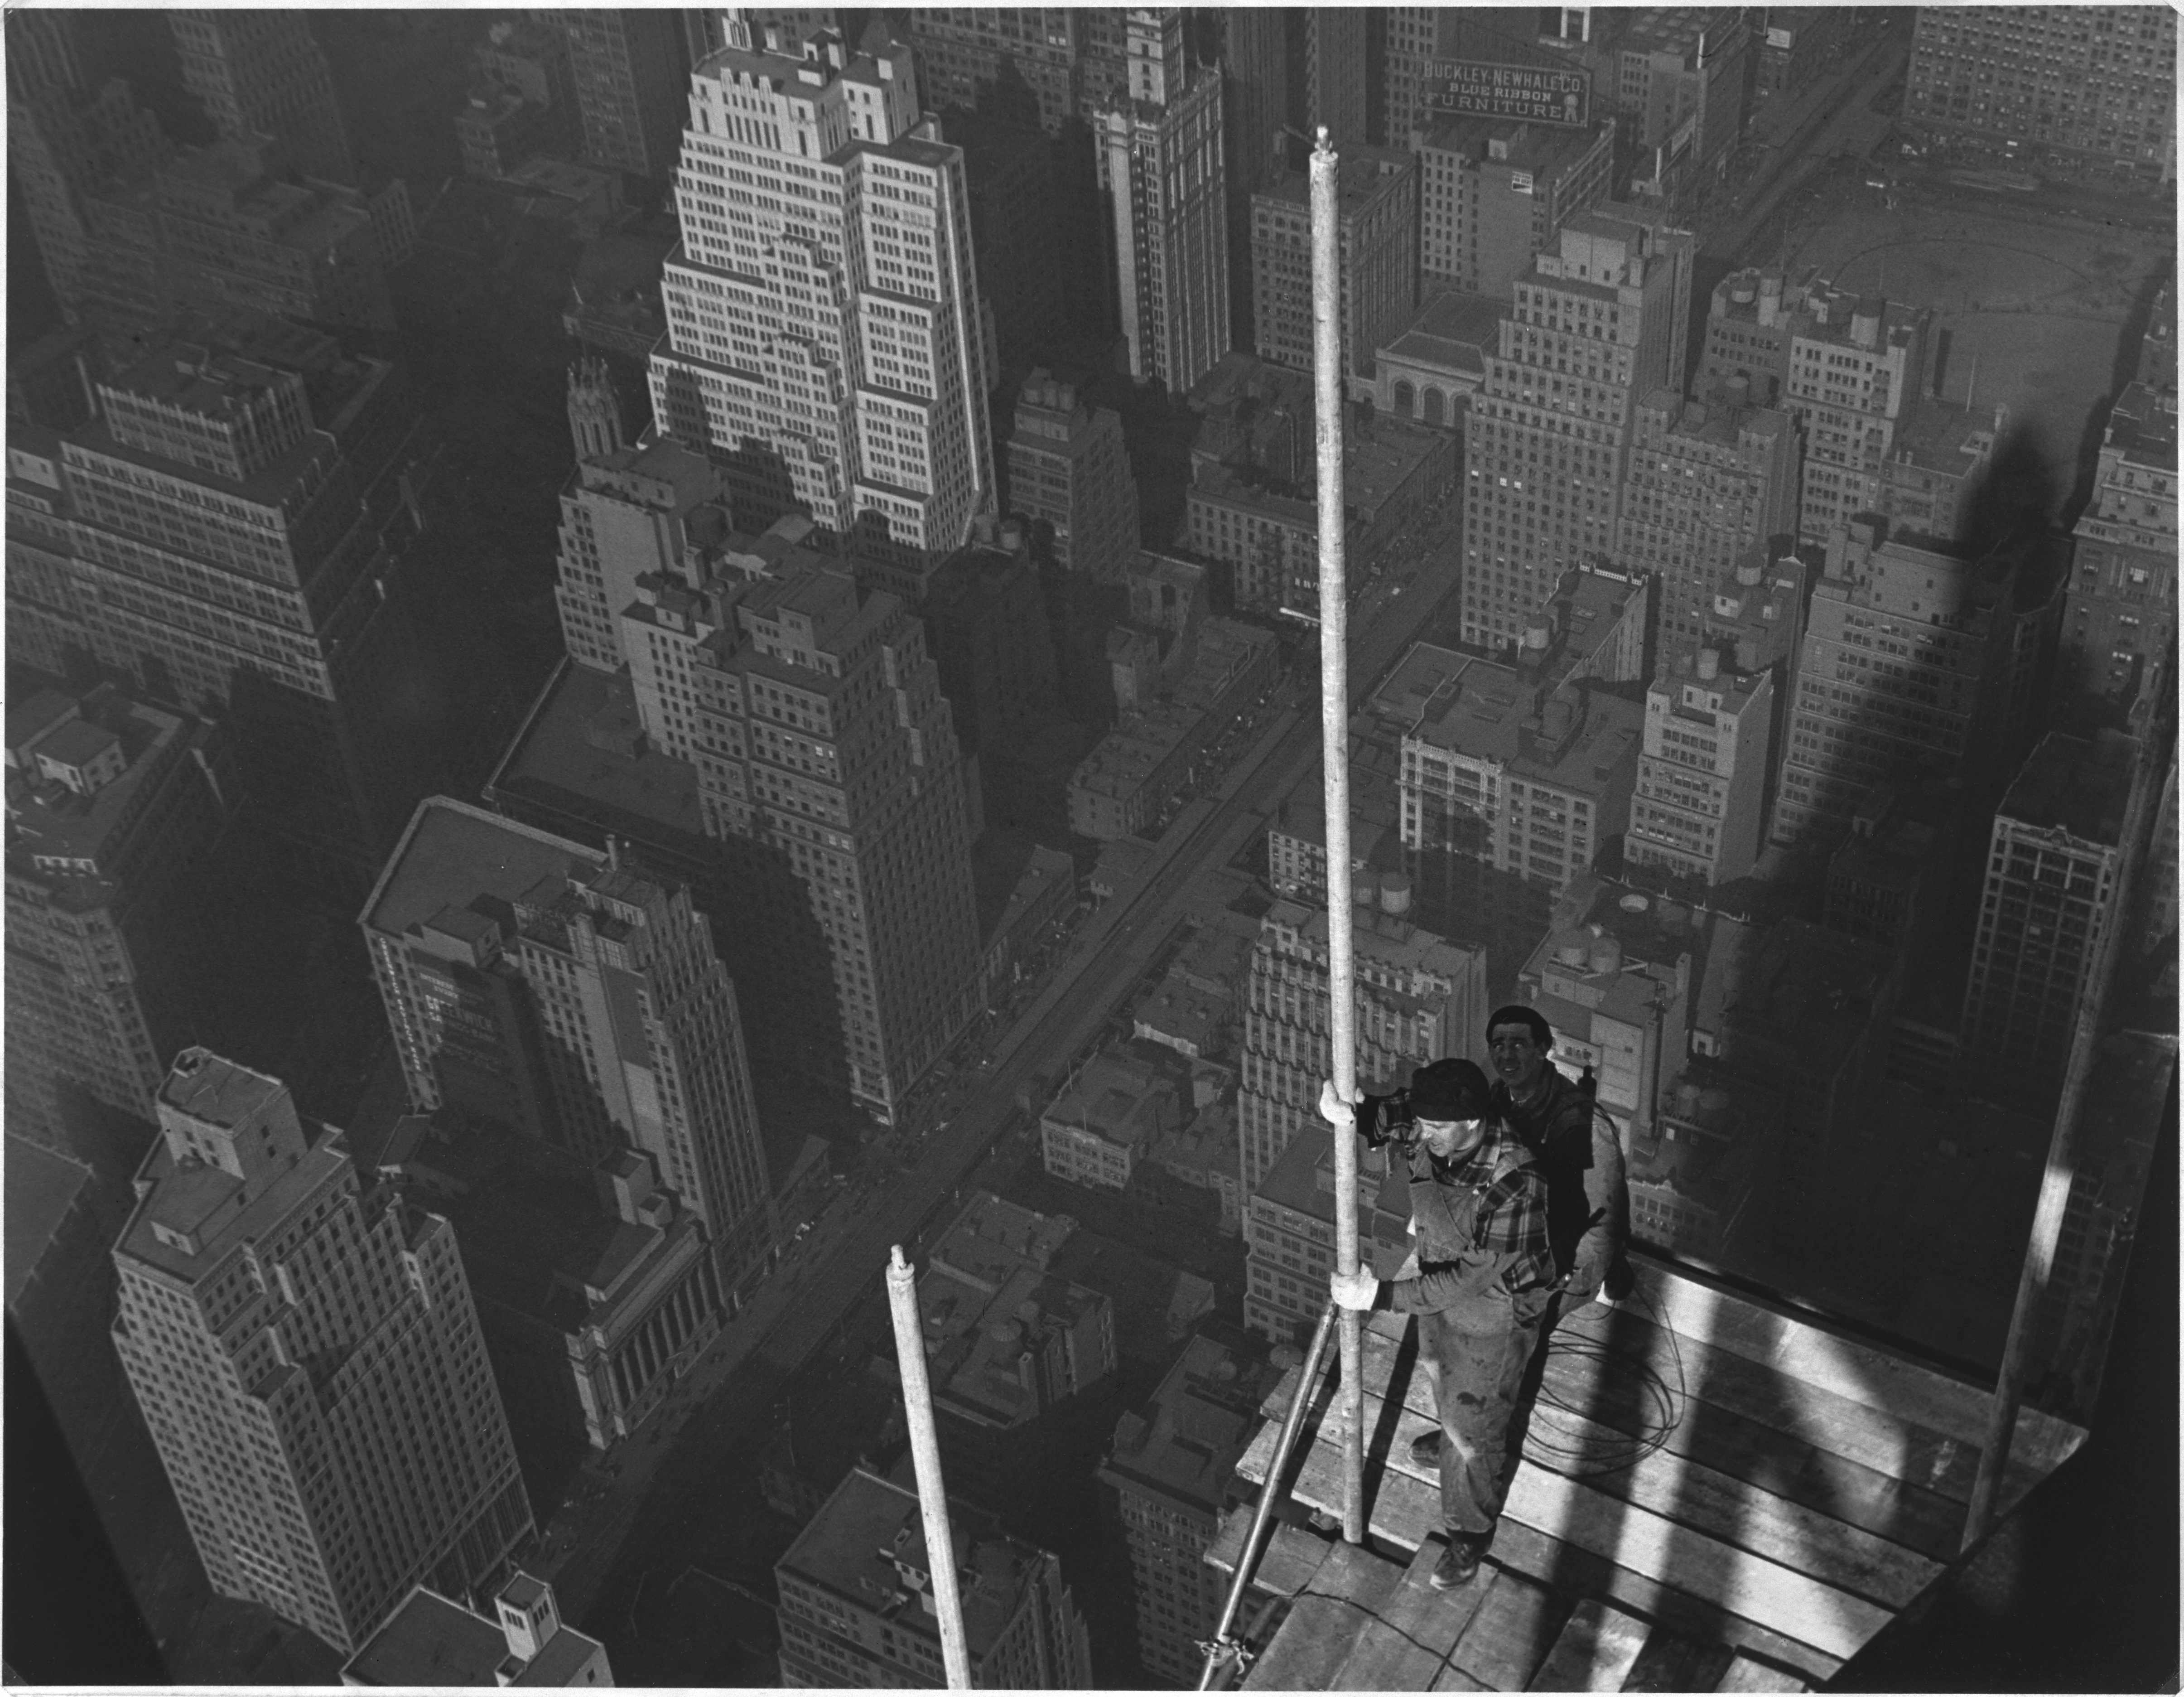 Topping the Mast, Empire State Building